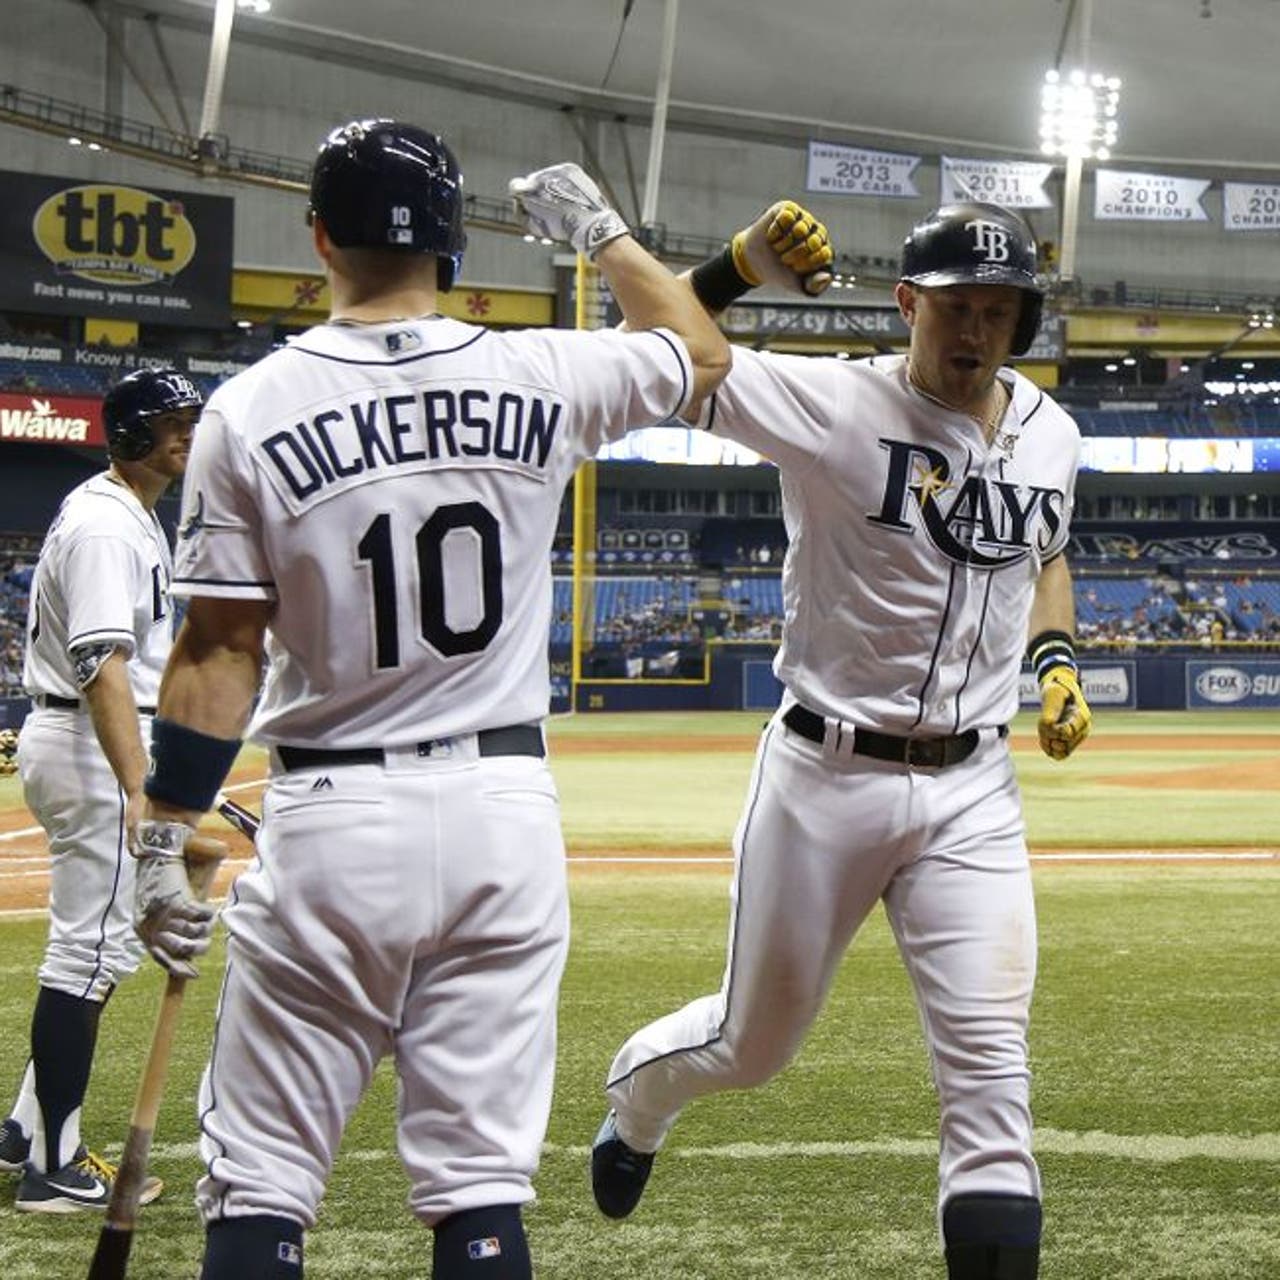 Incredible': Rays outfielder David Peralta's story of perseverance